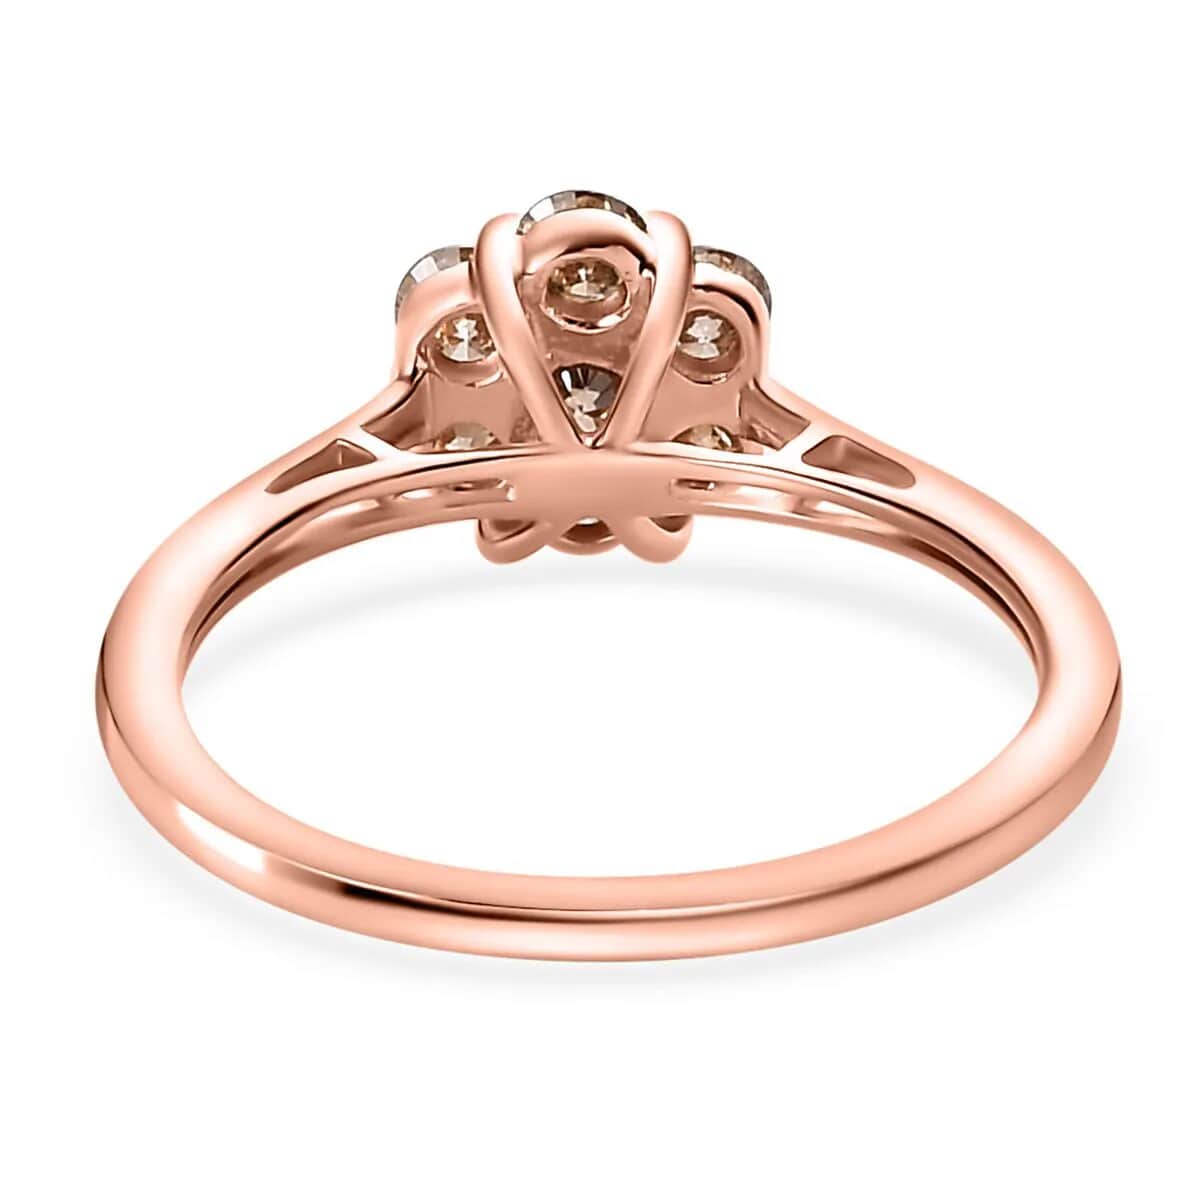 Luxoro 10K Rose Gold Natural Champagne Diamond Floral Ring ,Diamond Floral Ring, Engagement Rings, Seven Stone Ring For Women 0.50 ctw (Size 5.0) image number 4